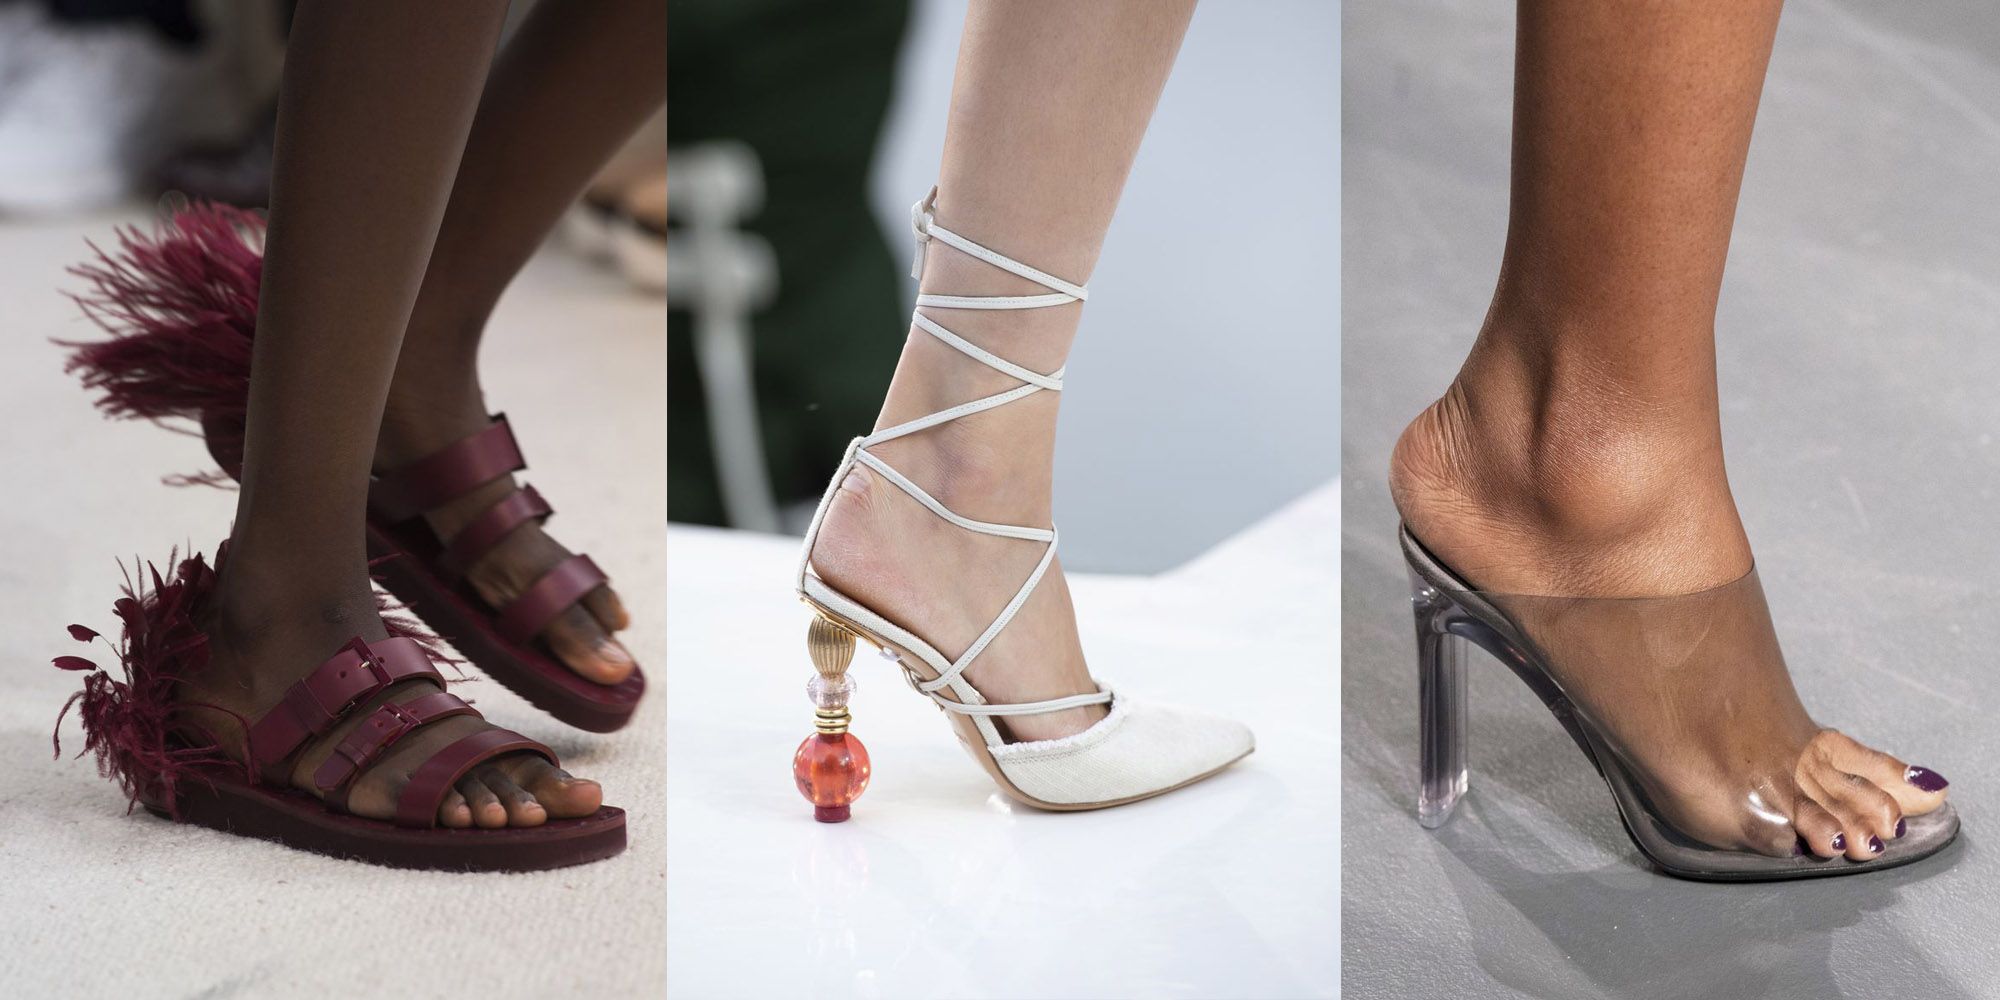 Enrich Rationel middelalderlig Here Are 2019's Best Shoe and Boot Trends — Popular Shoes to Buy in 2019